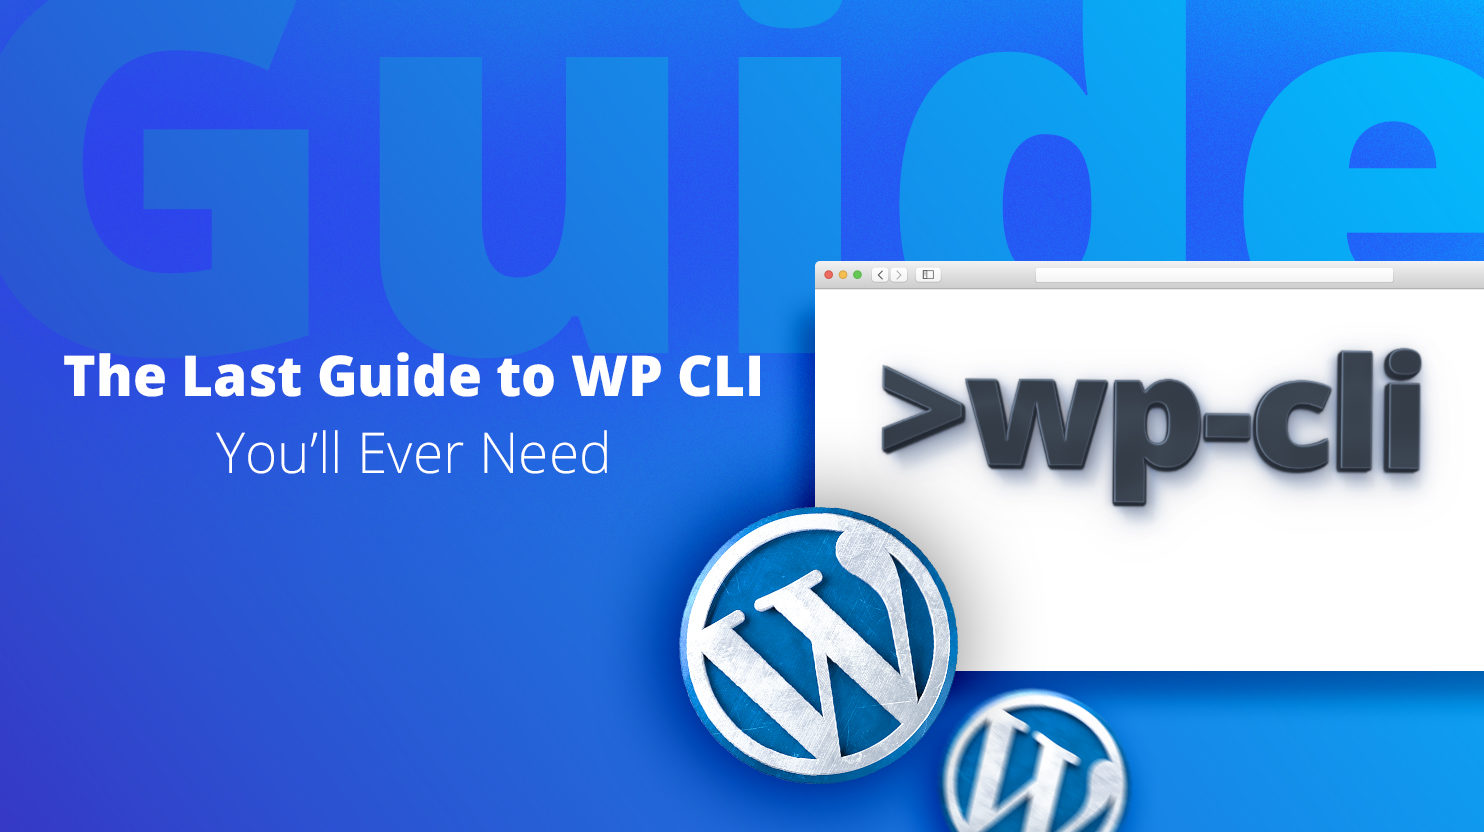 The Last Guide to WP CLI You'll Ever Need